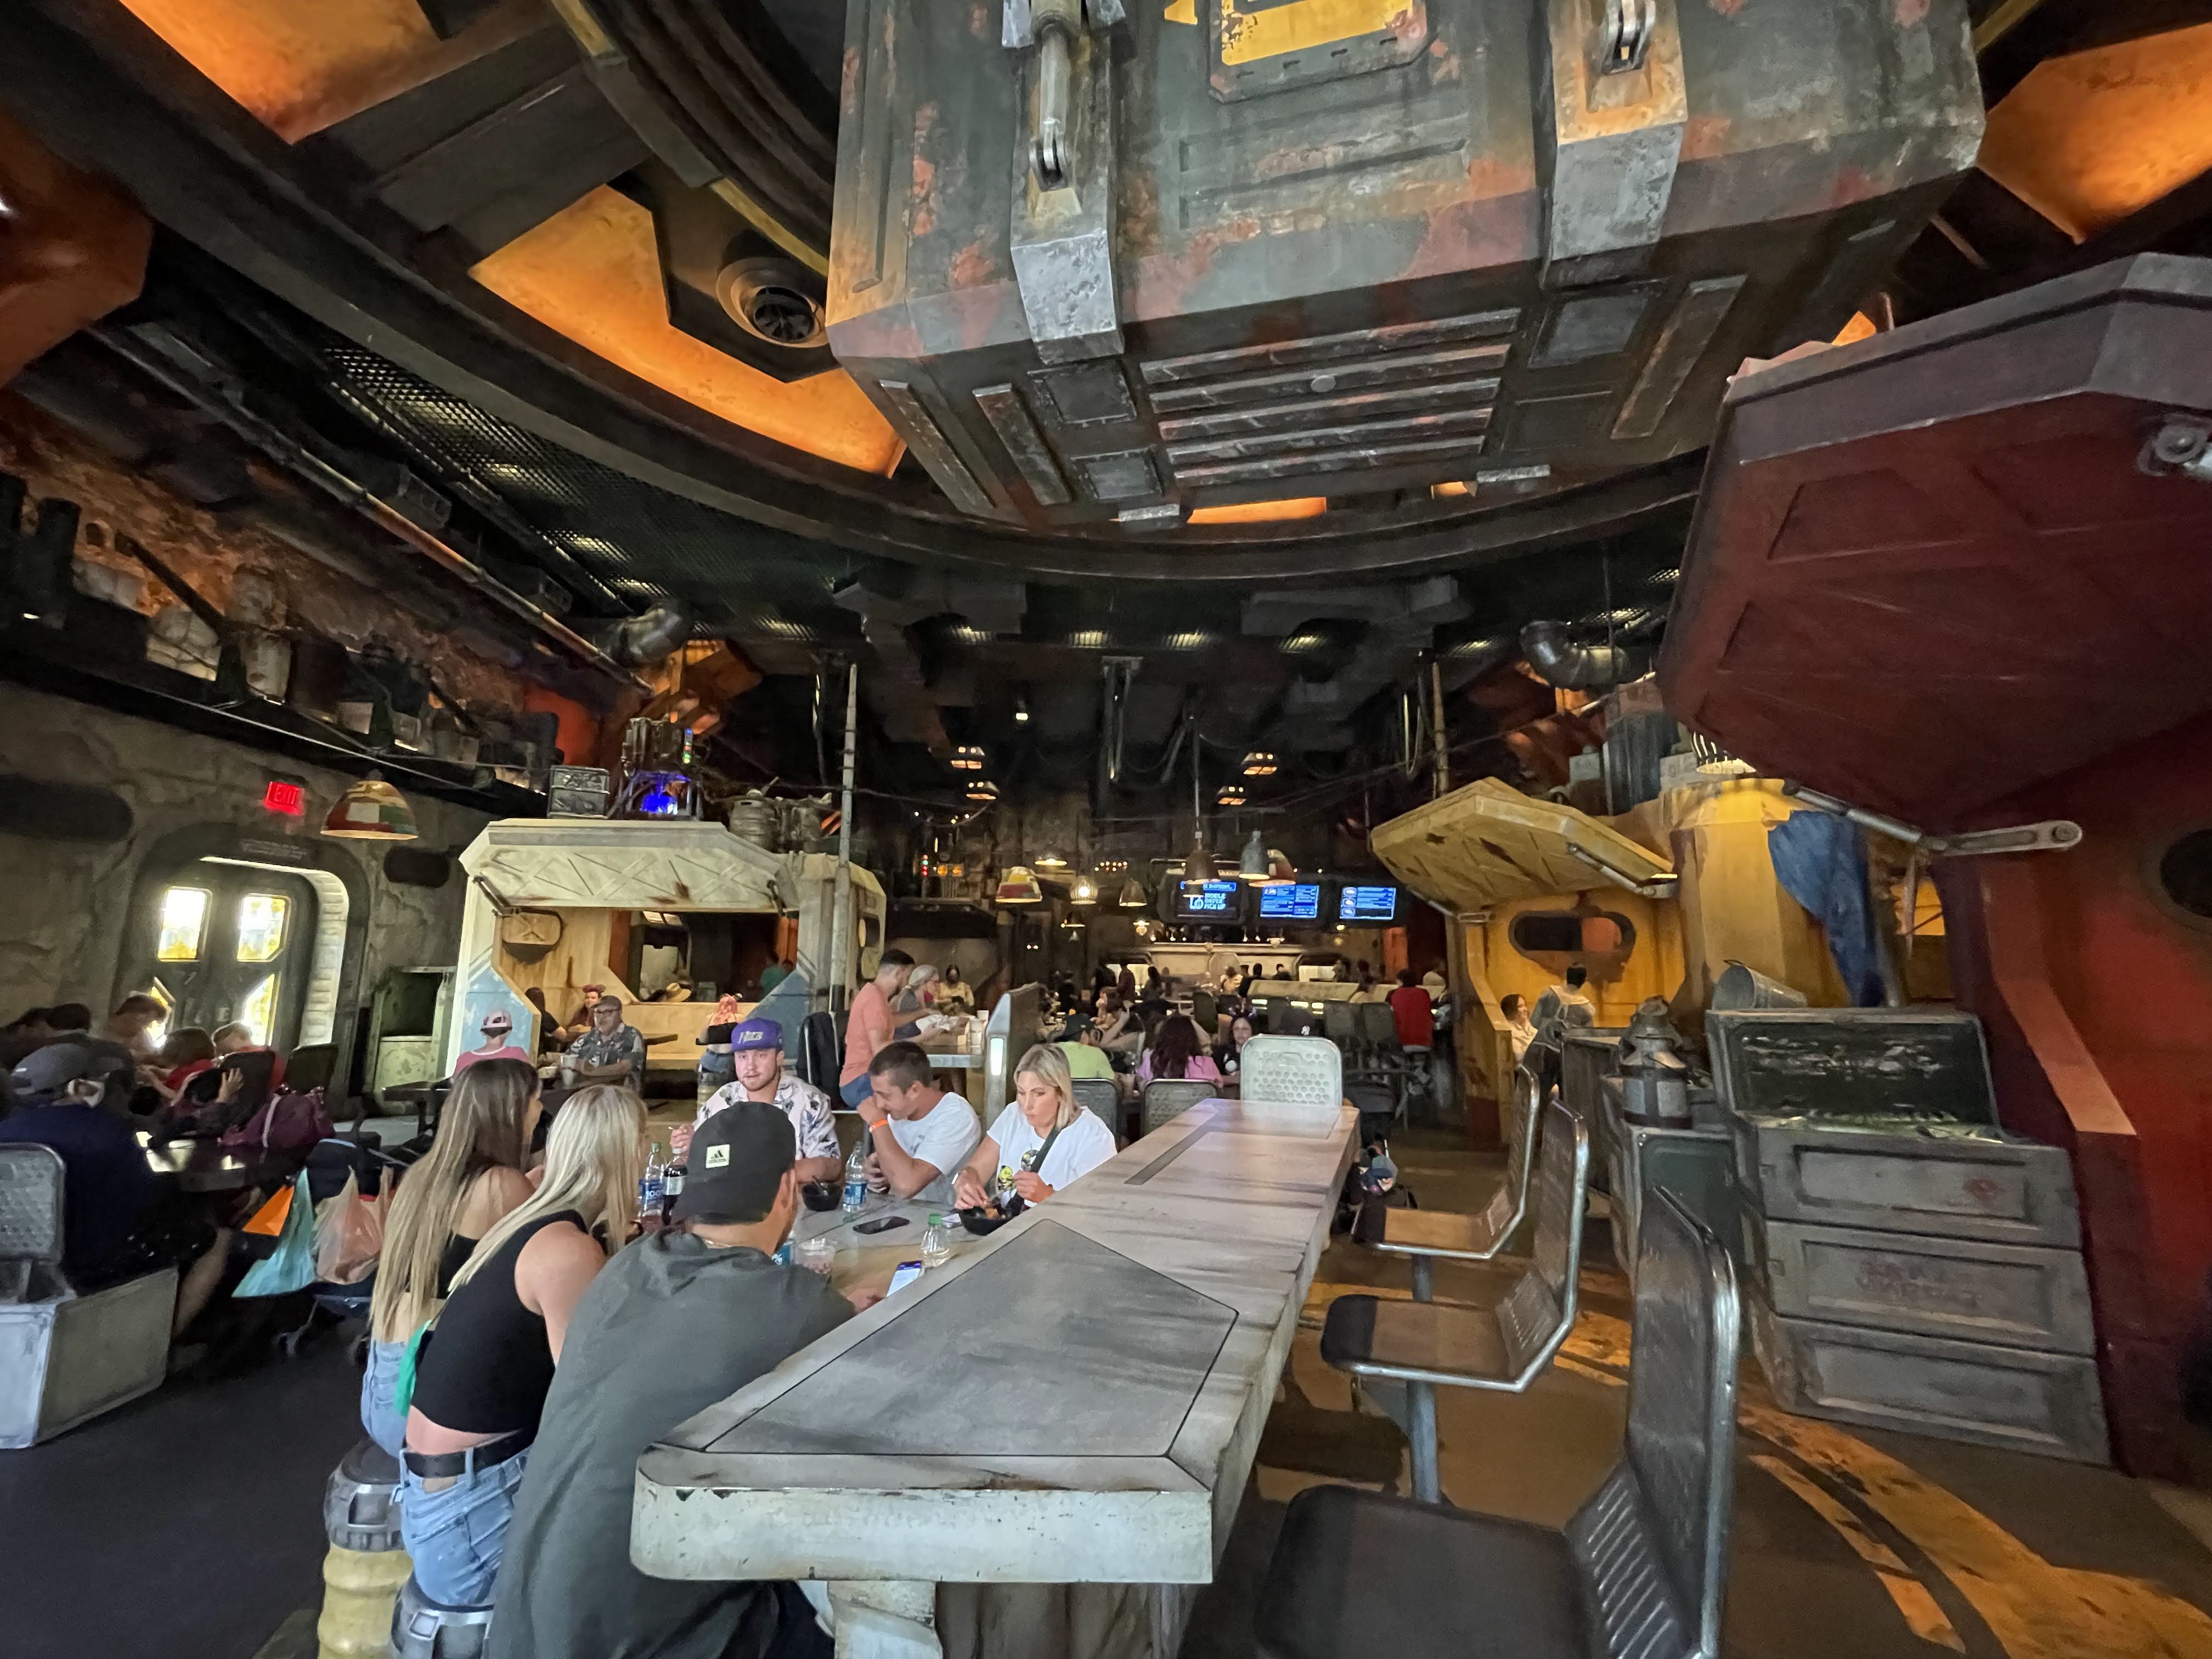 People eating in a food area designed to look like a hangar bay.